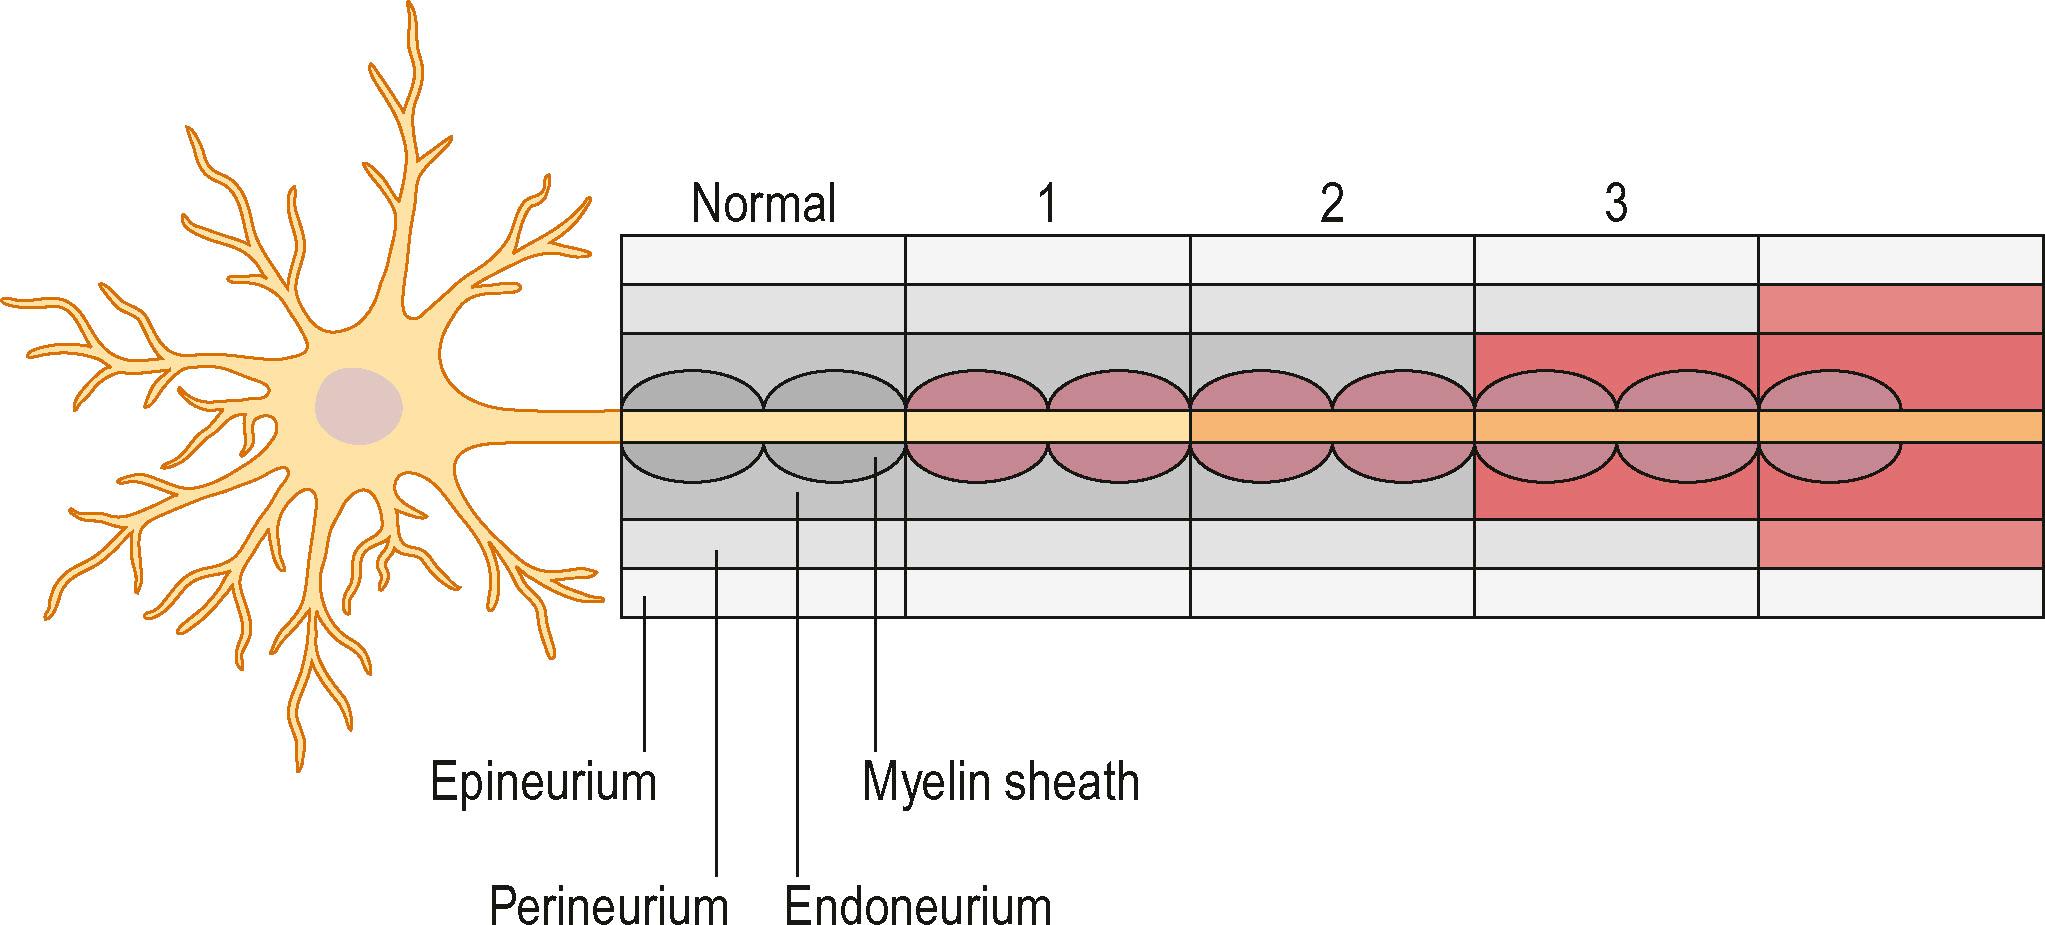 Figure 22.8, Schematic of damaged structures within an axon according to the classification of Sunderland grades 1–5. Change in color (red) and pattern indicates damage to each structure. Yellow represents an axon and its neuron.